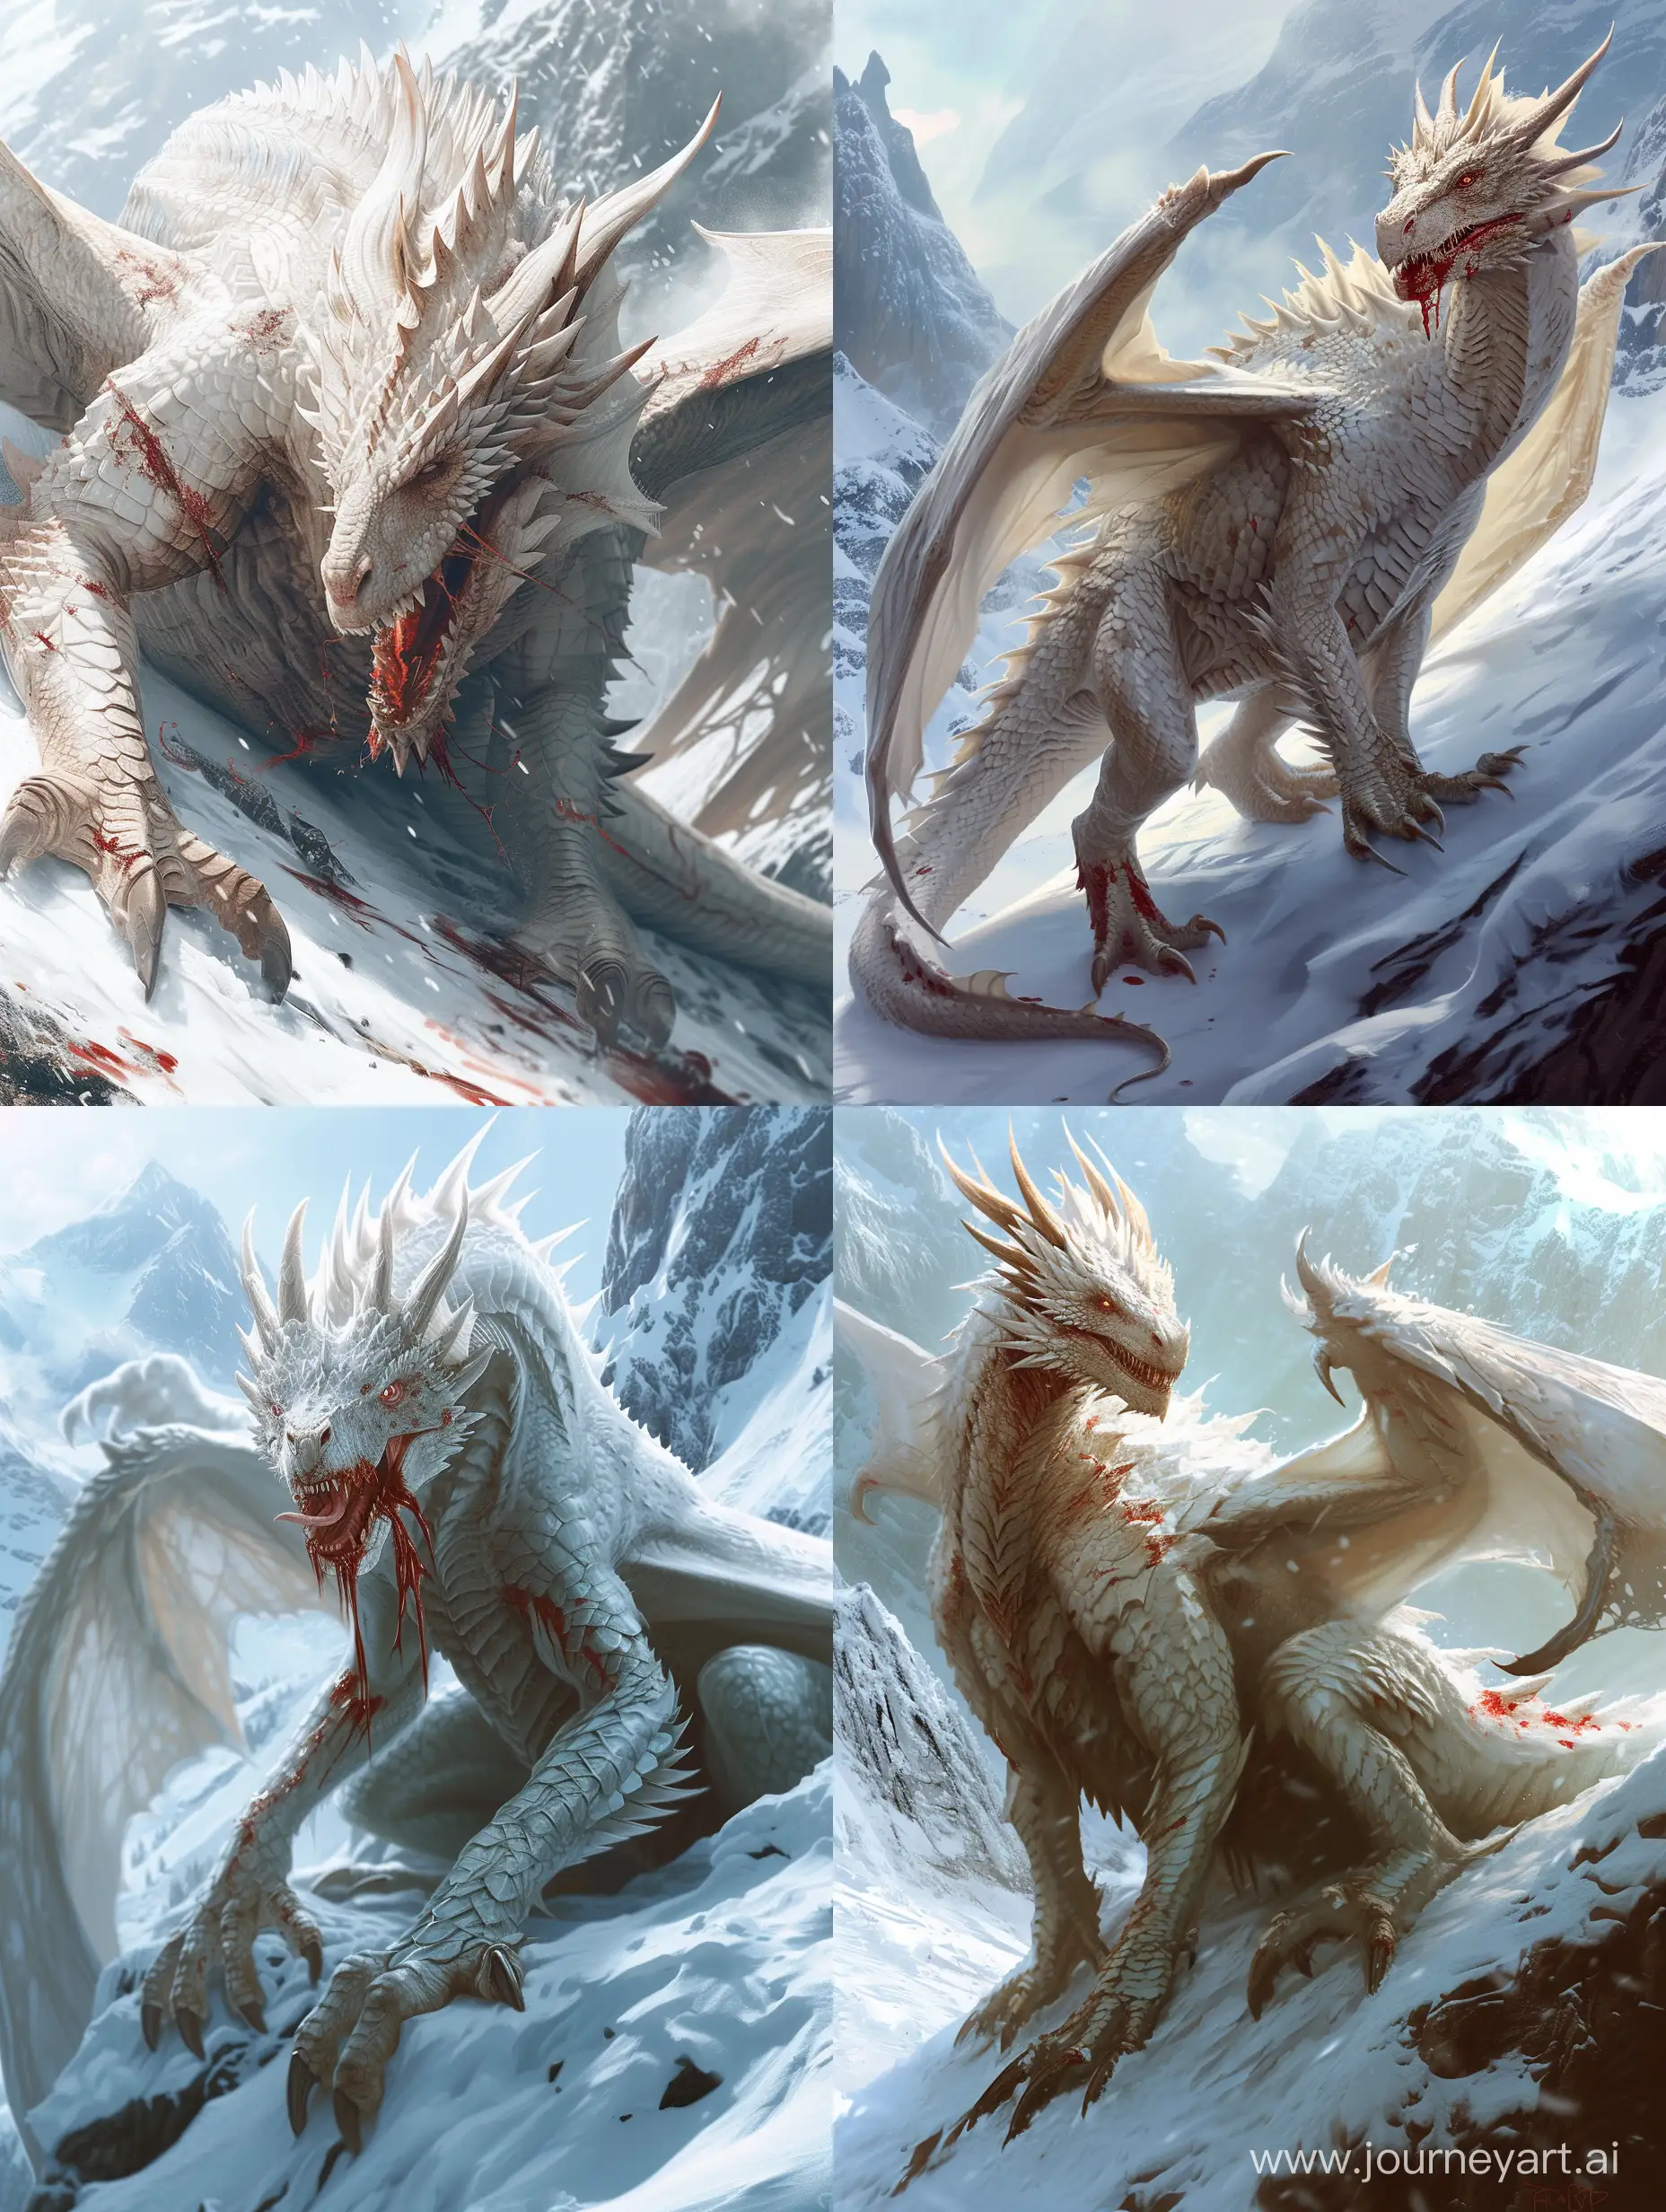 Majestic-Snowy-Mountain-Encounter-with-a-Formidable-White-Dragon